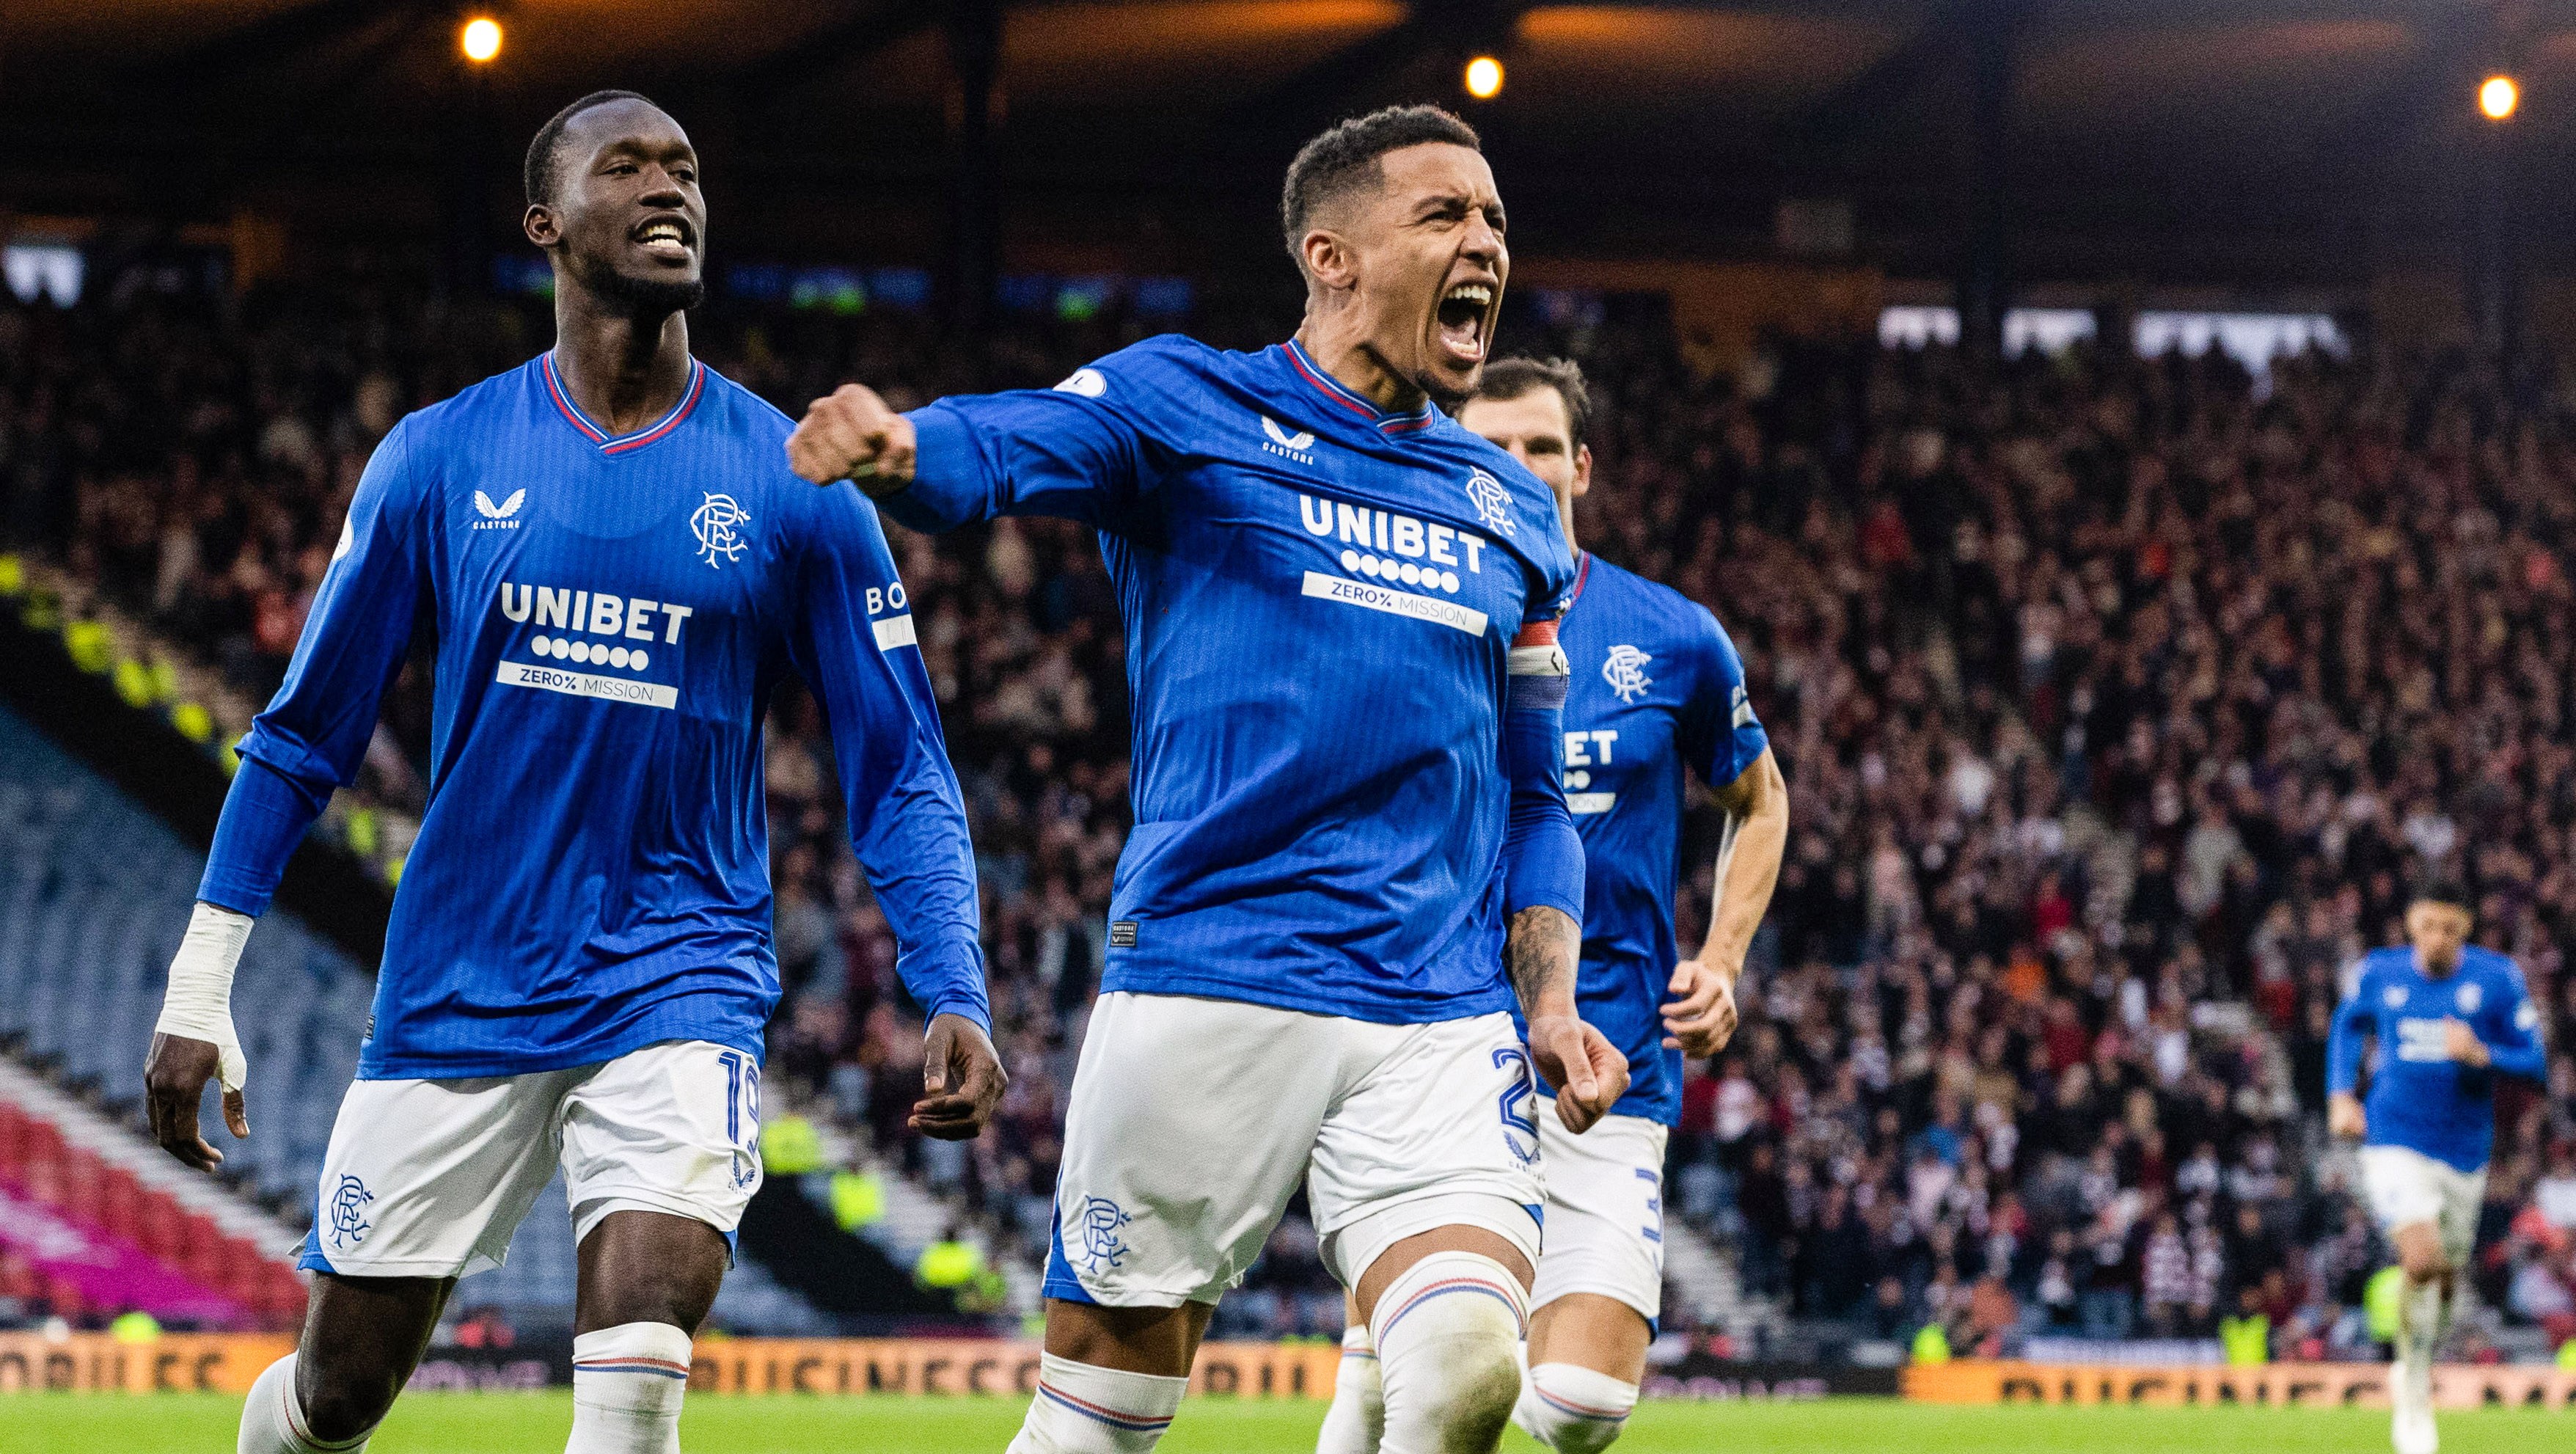 Tavernier celebrates after scoring to make it 3-0 the the semi-final. (Photo by Alan Harvey / SNS Group)